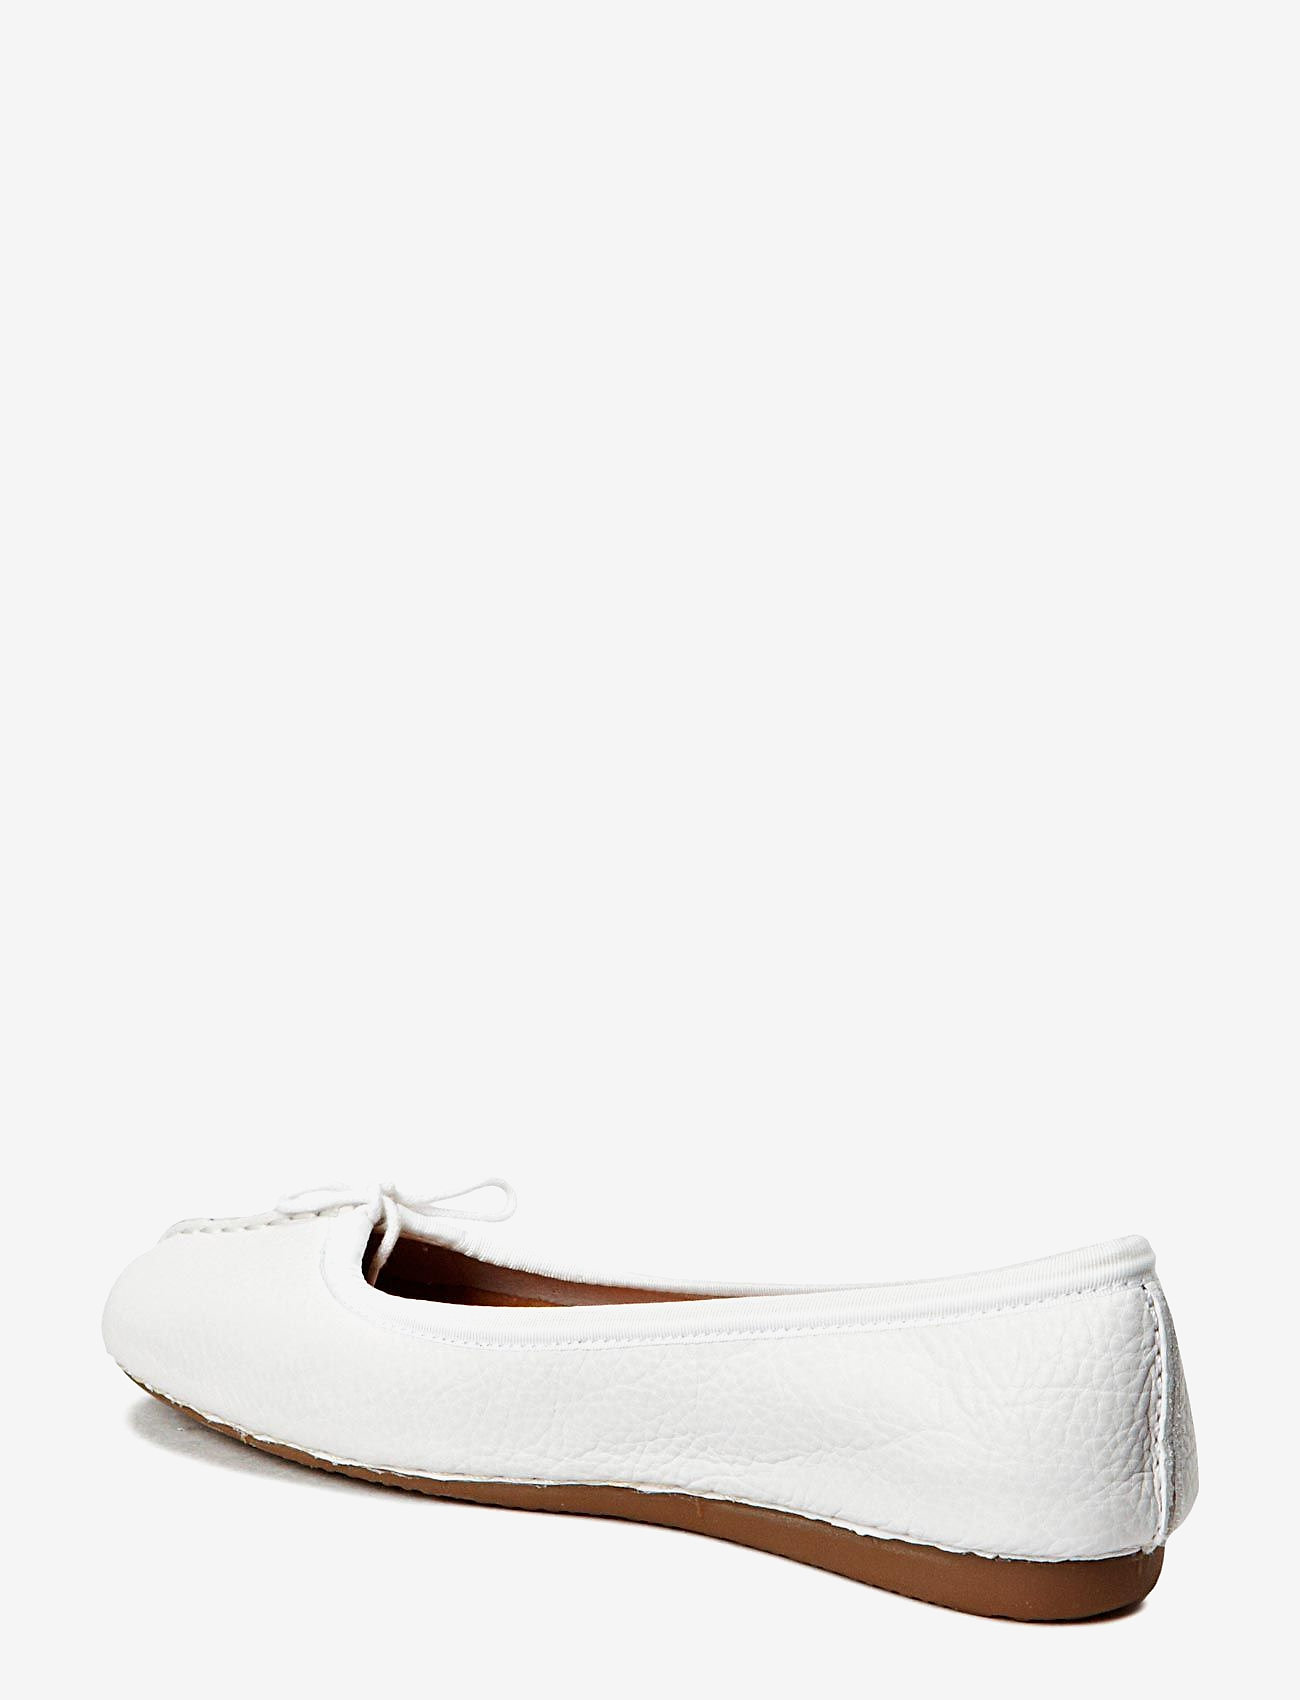 Clarks - Freckle Ice - occasion wear - white leather - 1